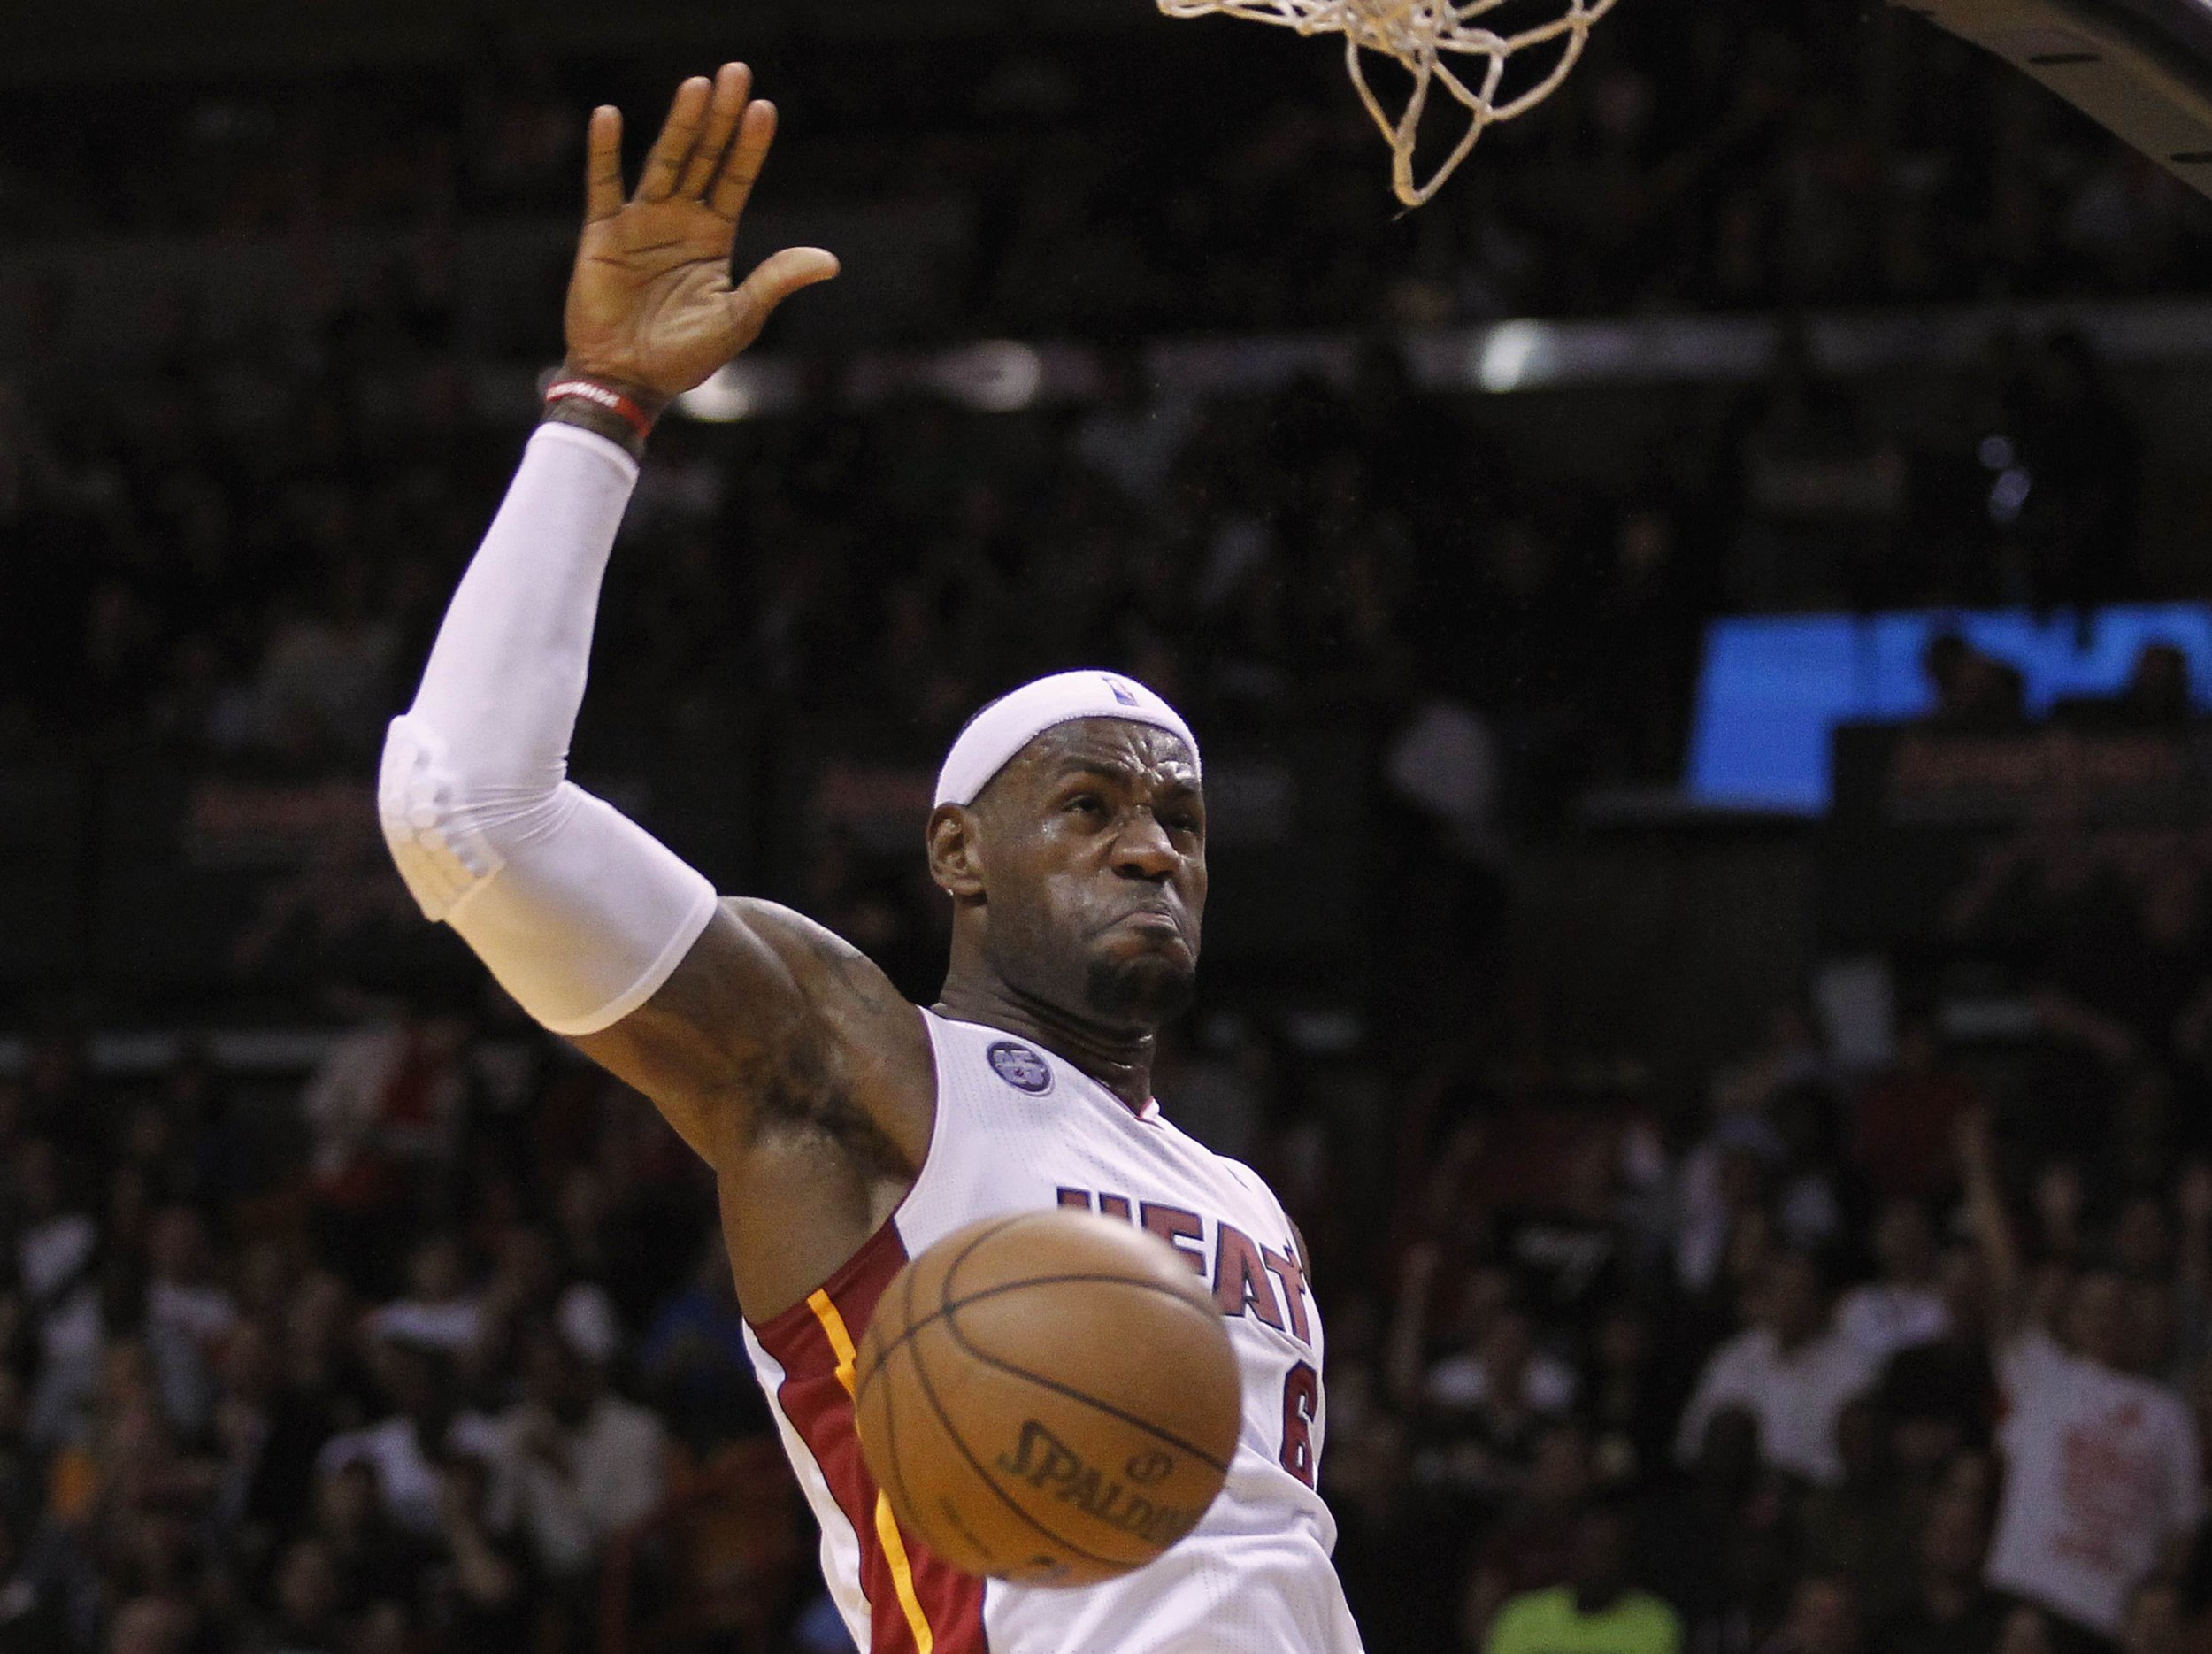 NoHeadband! The Very Best Pictures Of LeBron James Without His